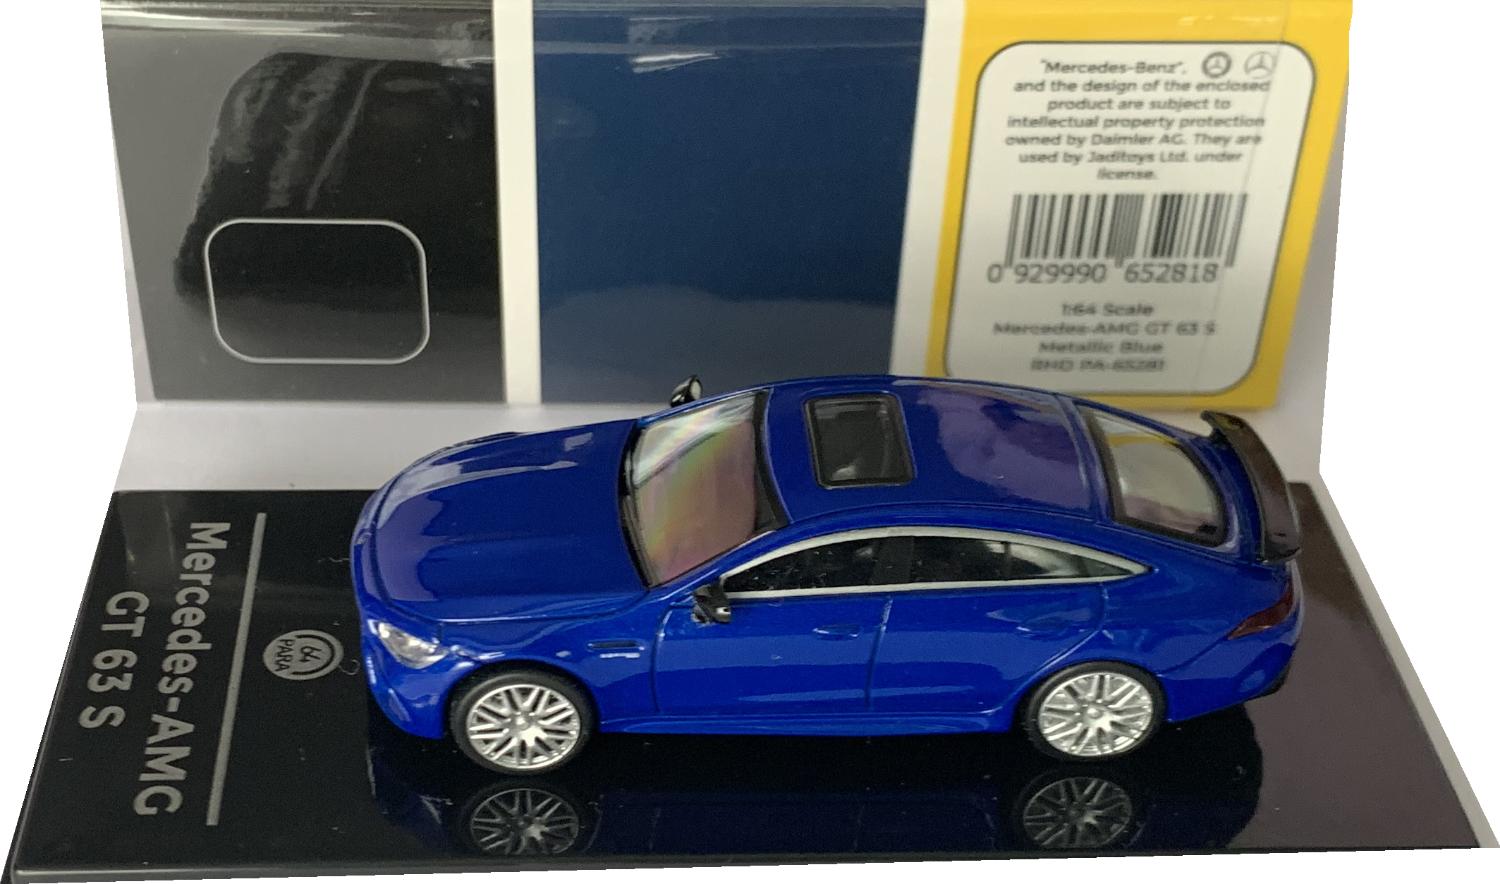 Mercedes AMG GT 63 S in metallic blue 1:64 scale model from Paragon Models